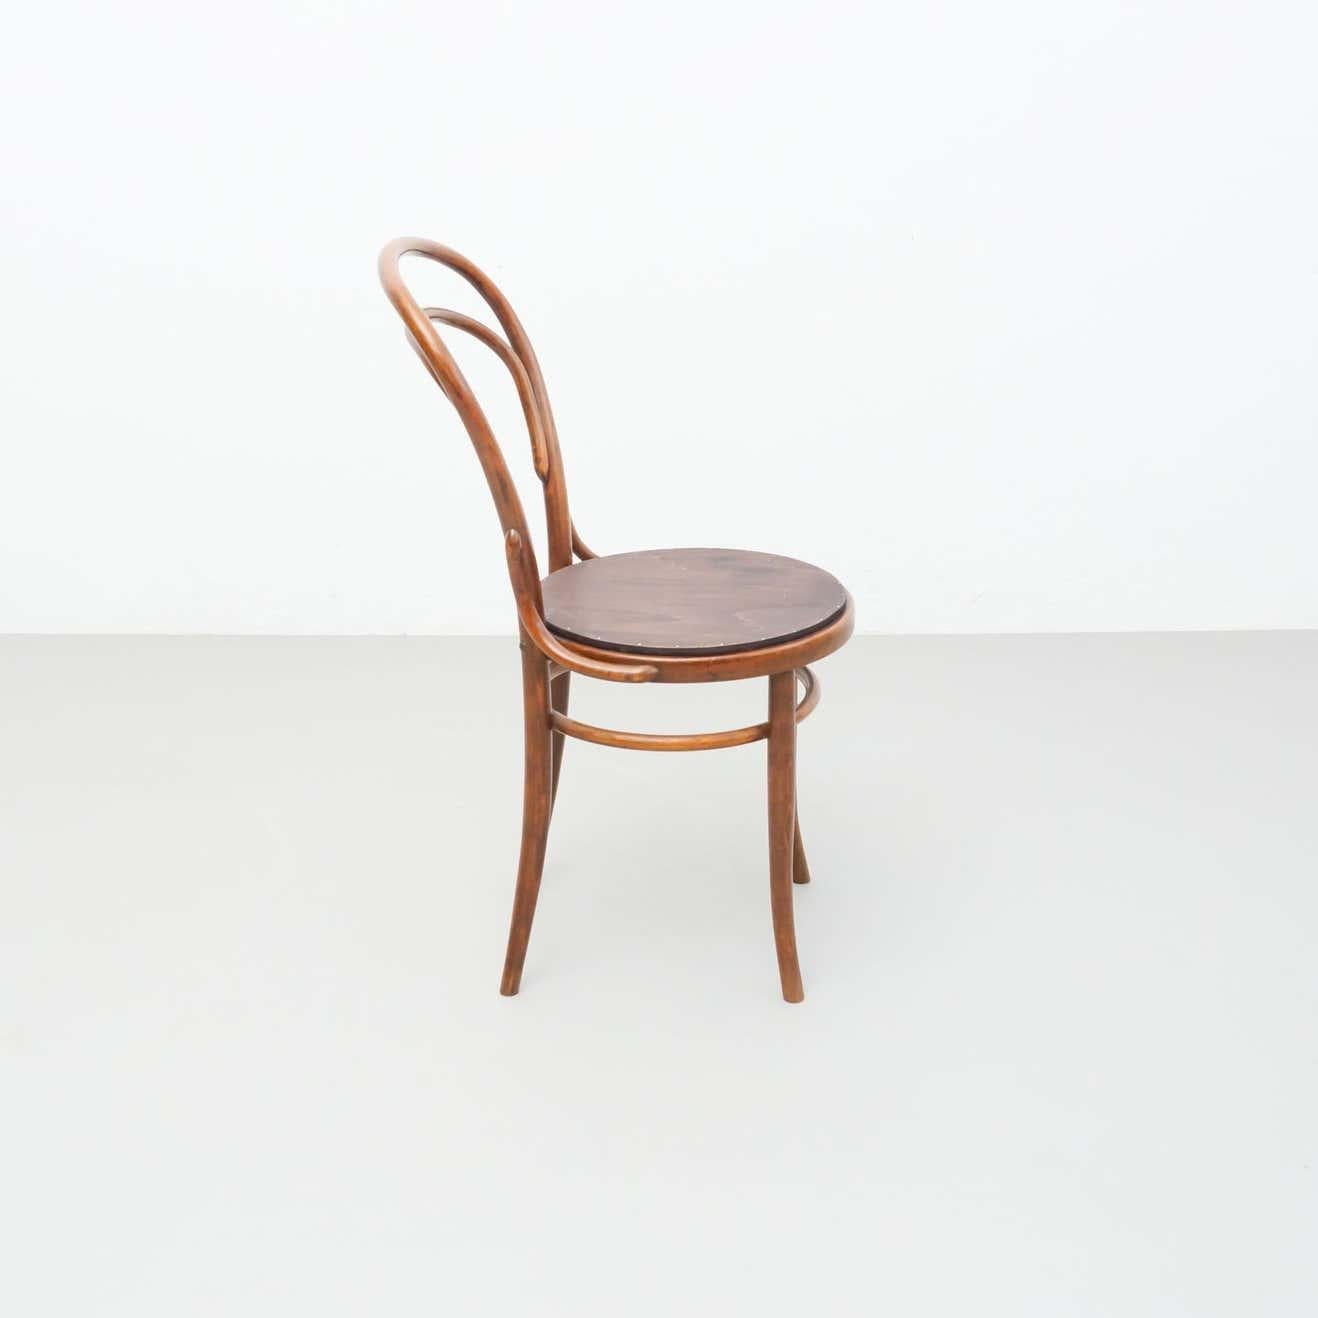 Mid-20th Century Bentwood Chair in the Style of Thonet, circa 1930 For Sale